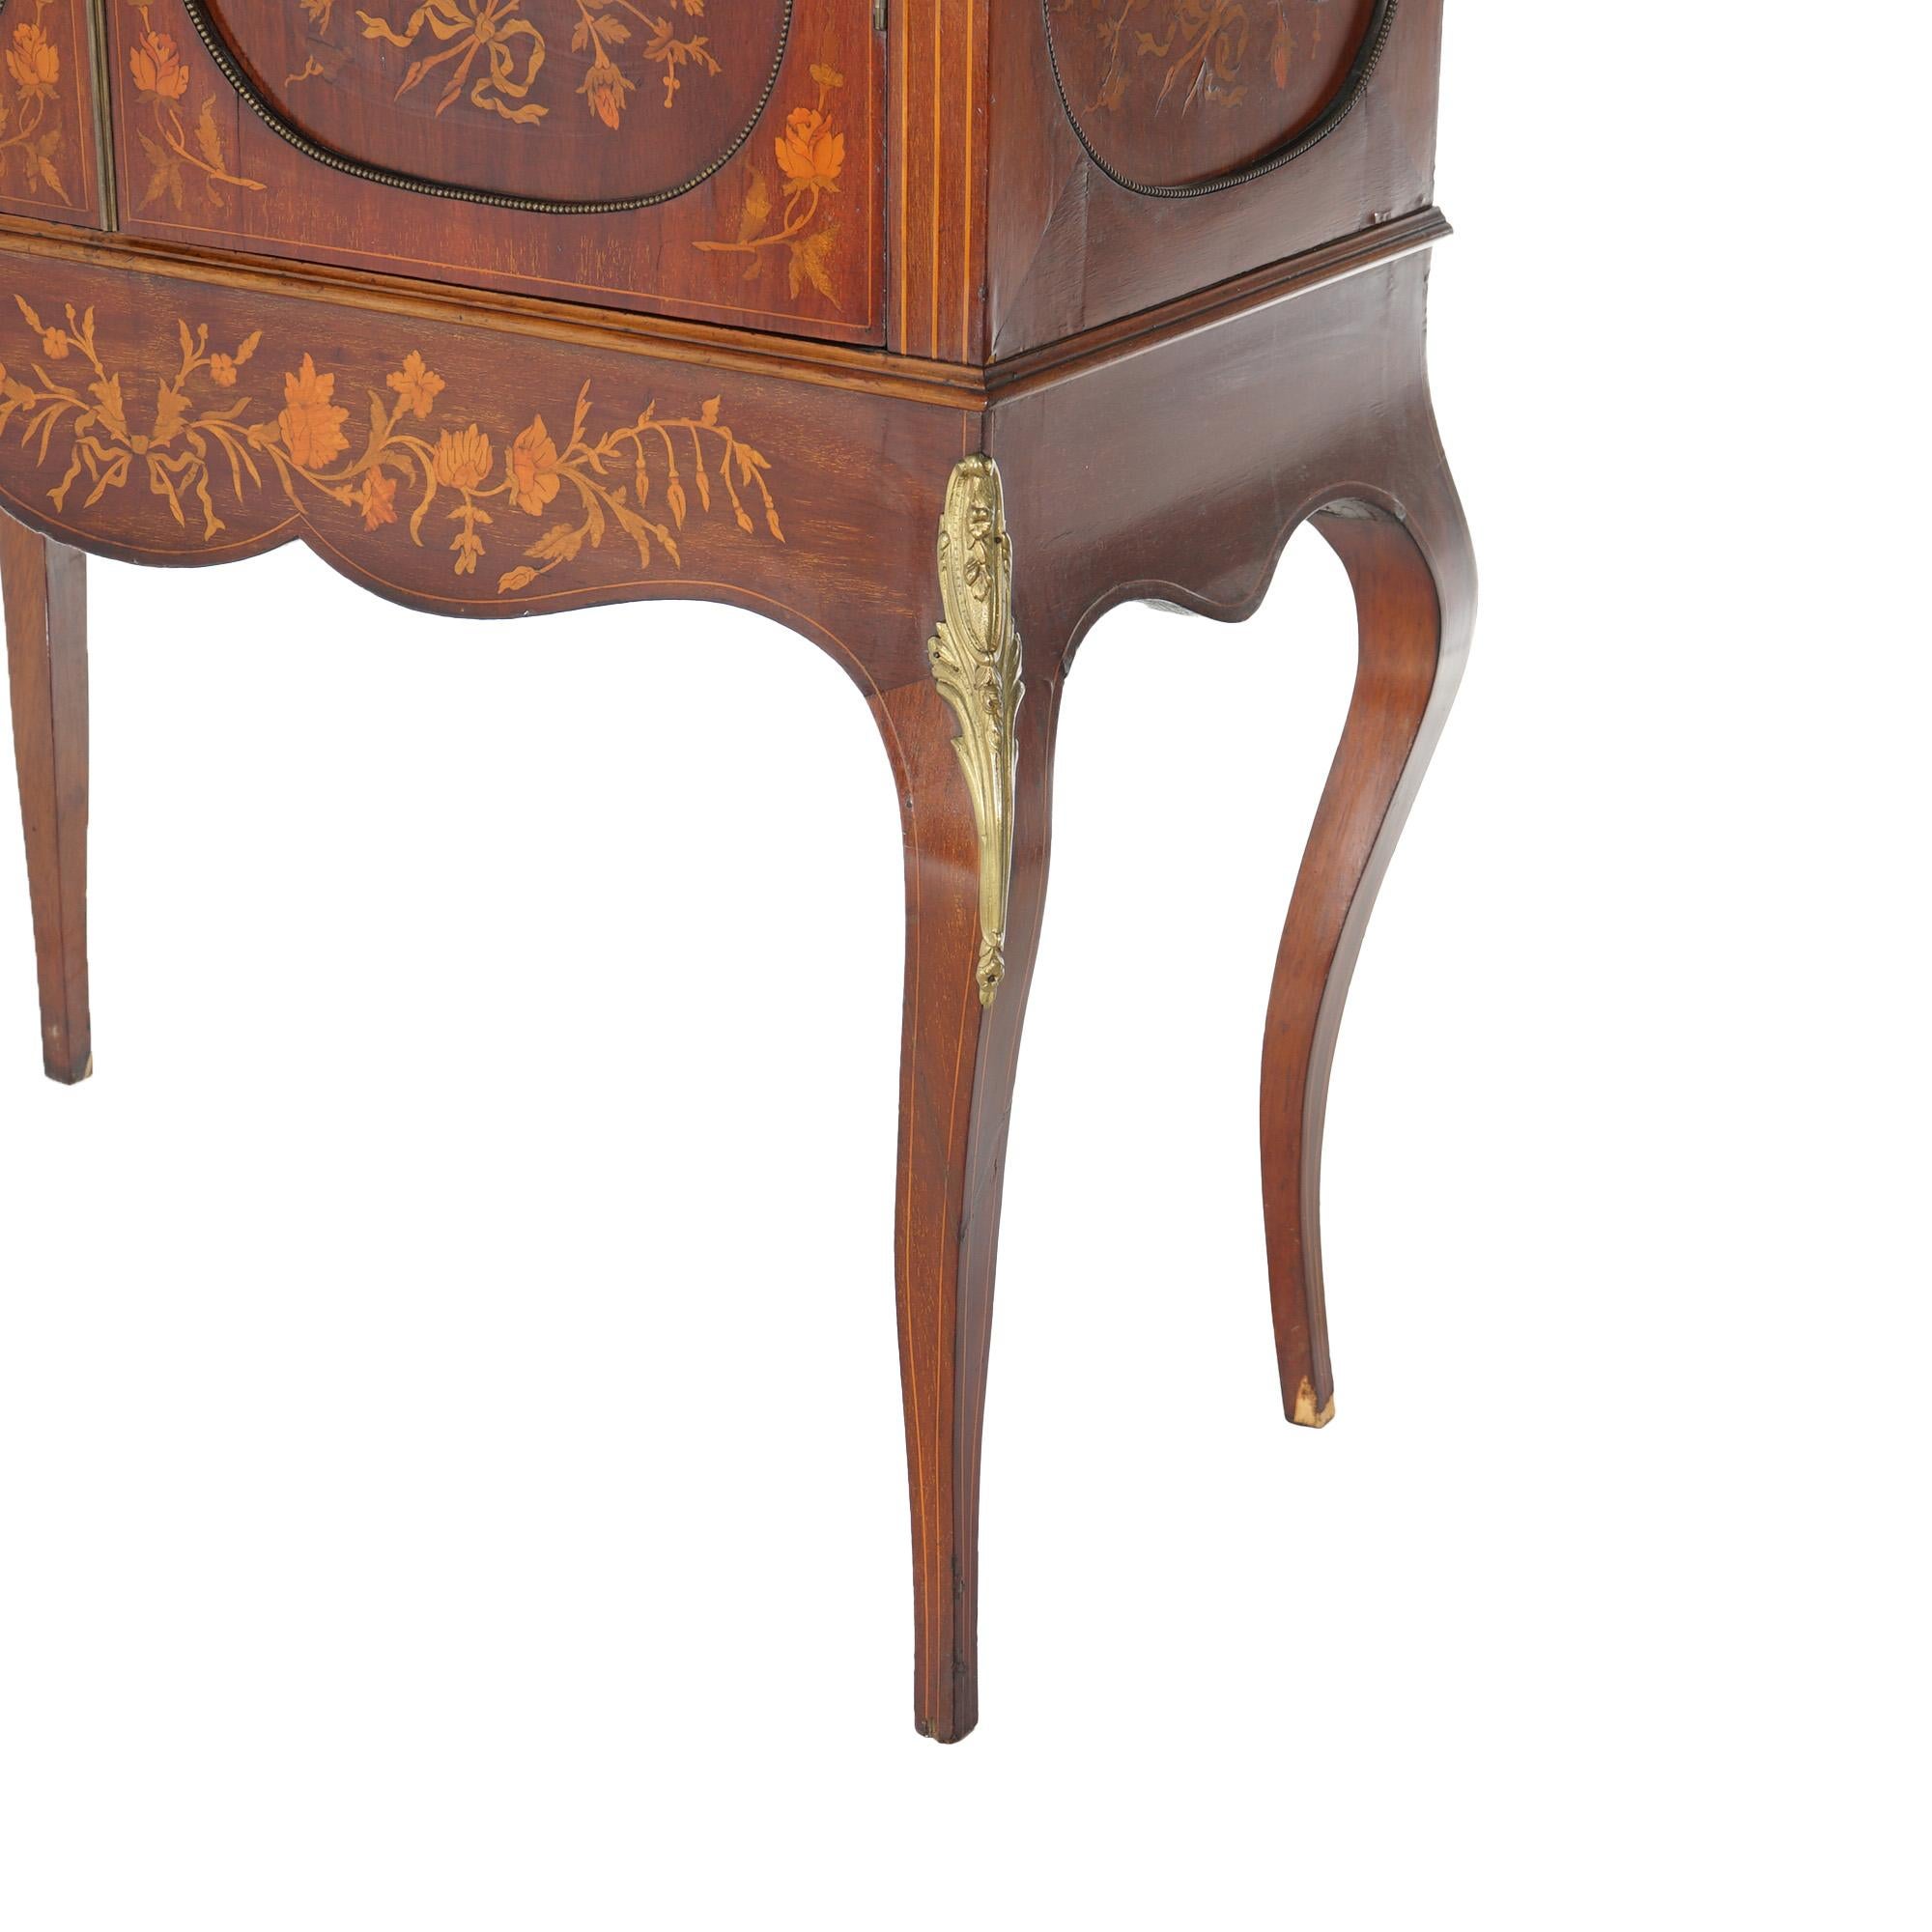 Antique Dutch Marquetry Mahogany Display Cabinet with Ormolu Mounts c1890 For Sale 8